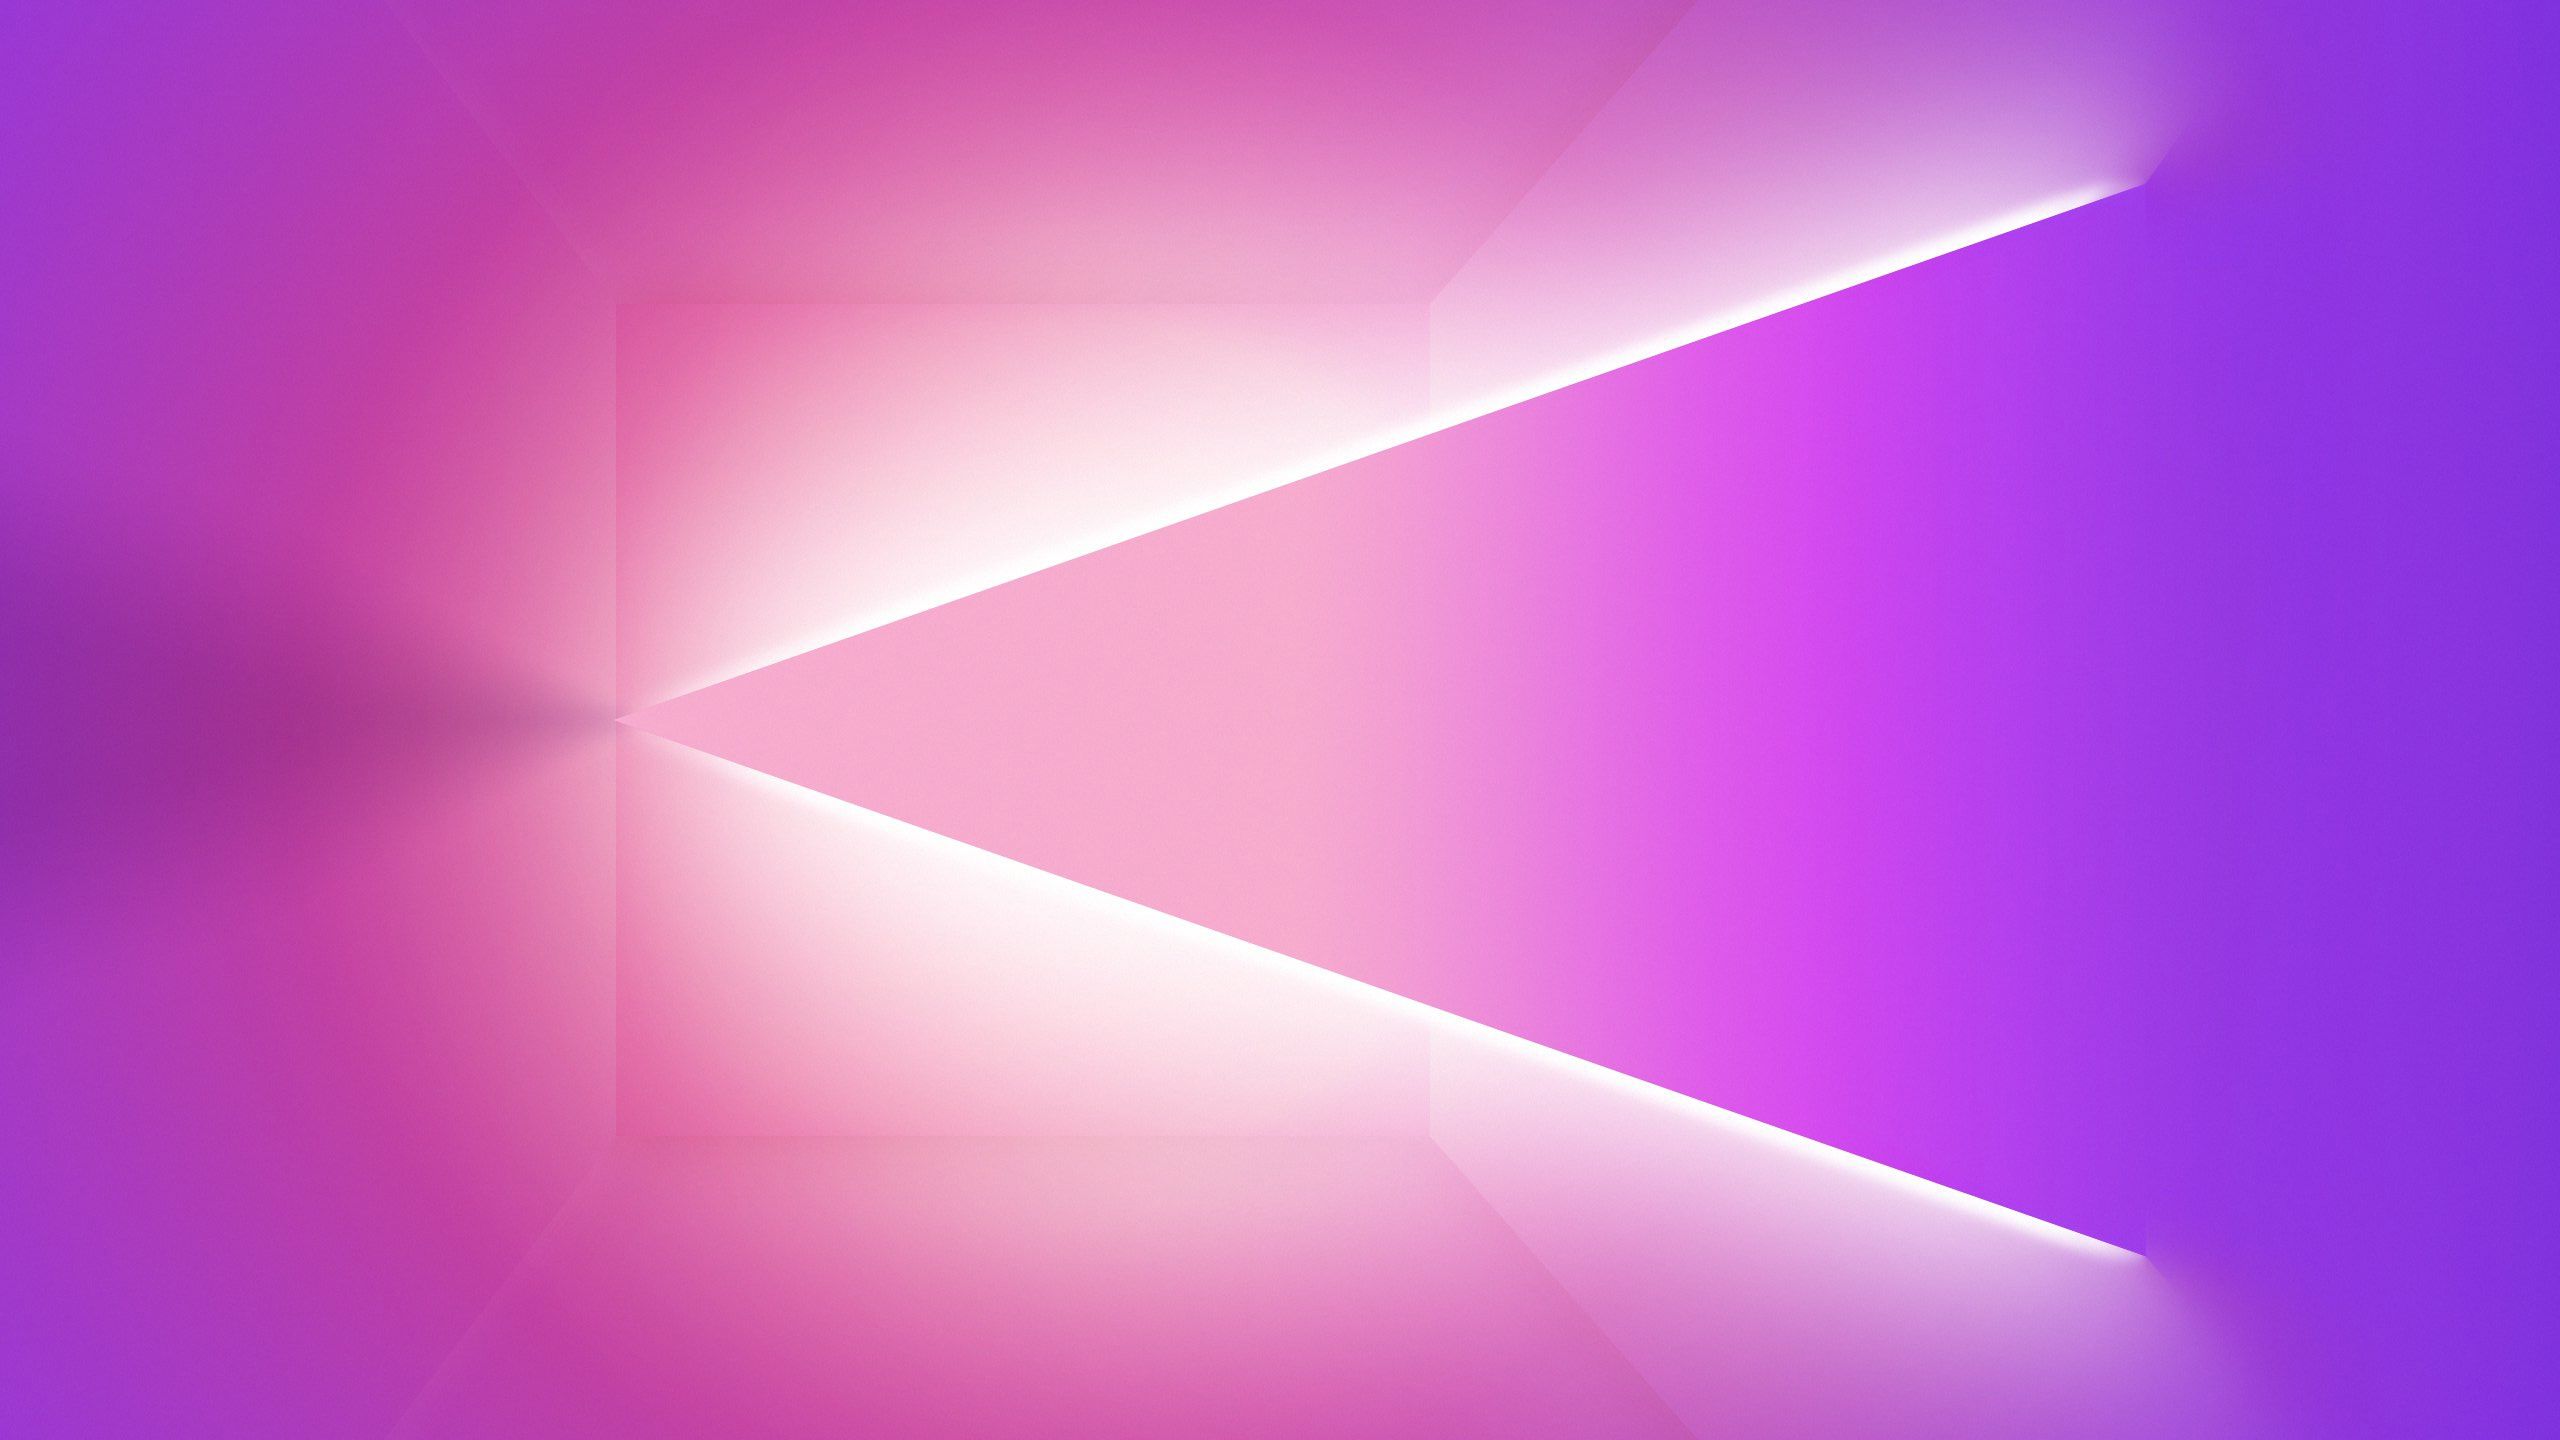 Download 2560x1440 Triangle, Pink, Neon Light Wallpaper for iMac